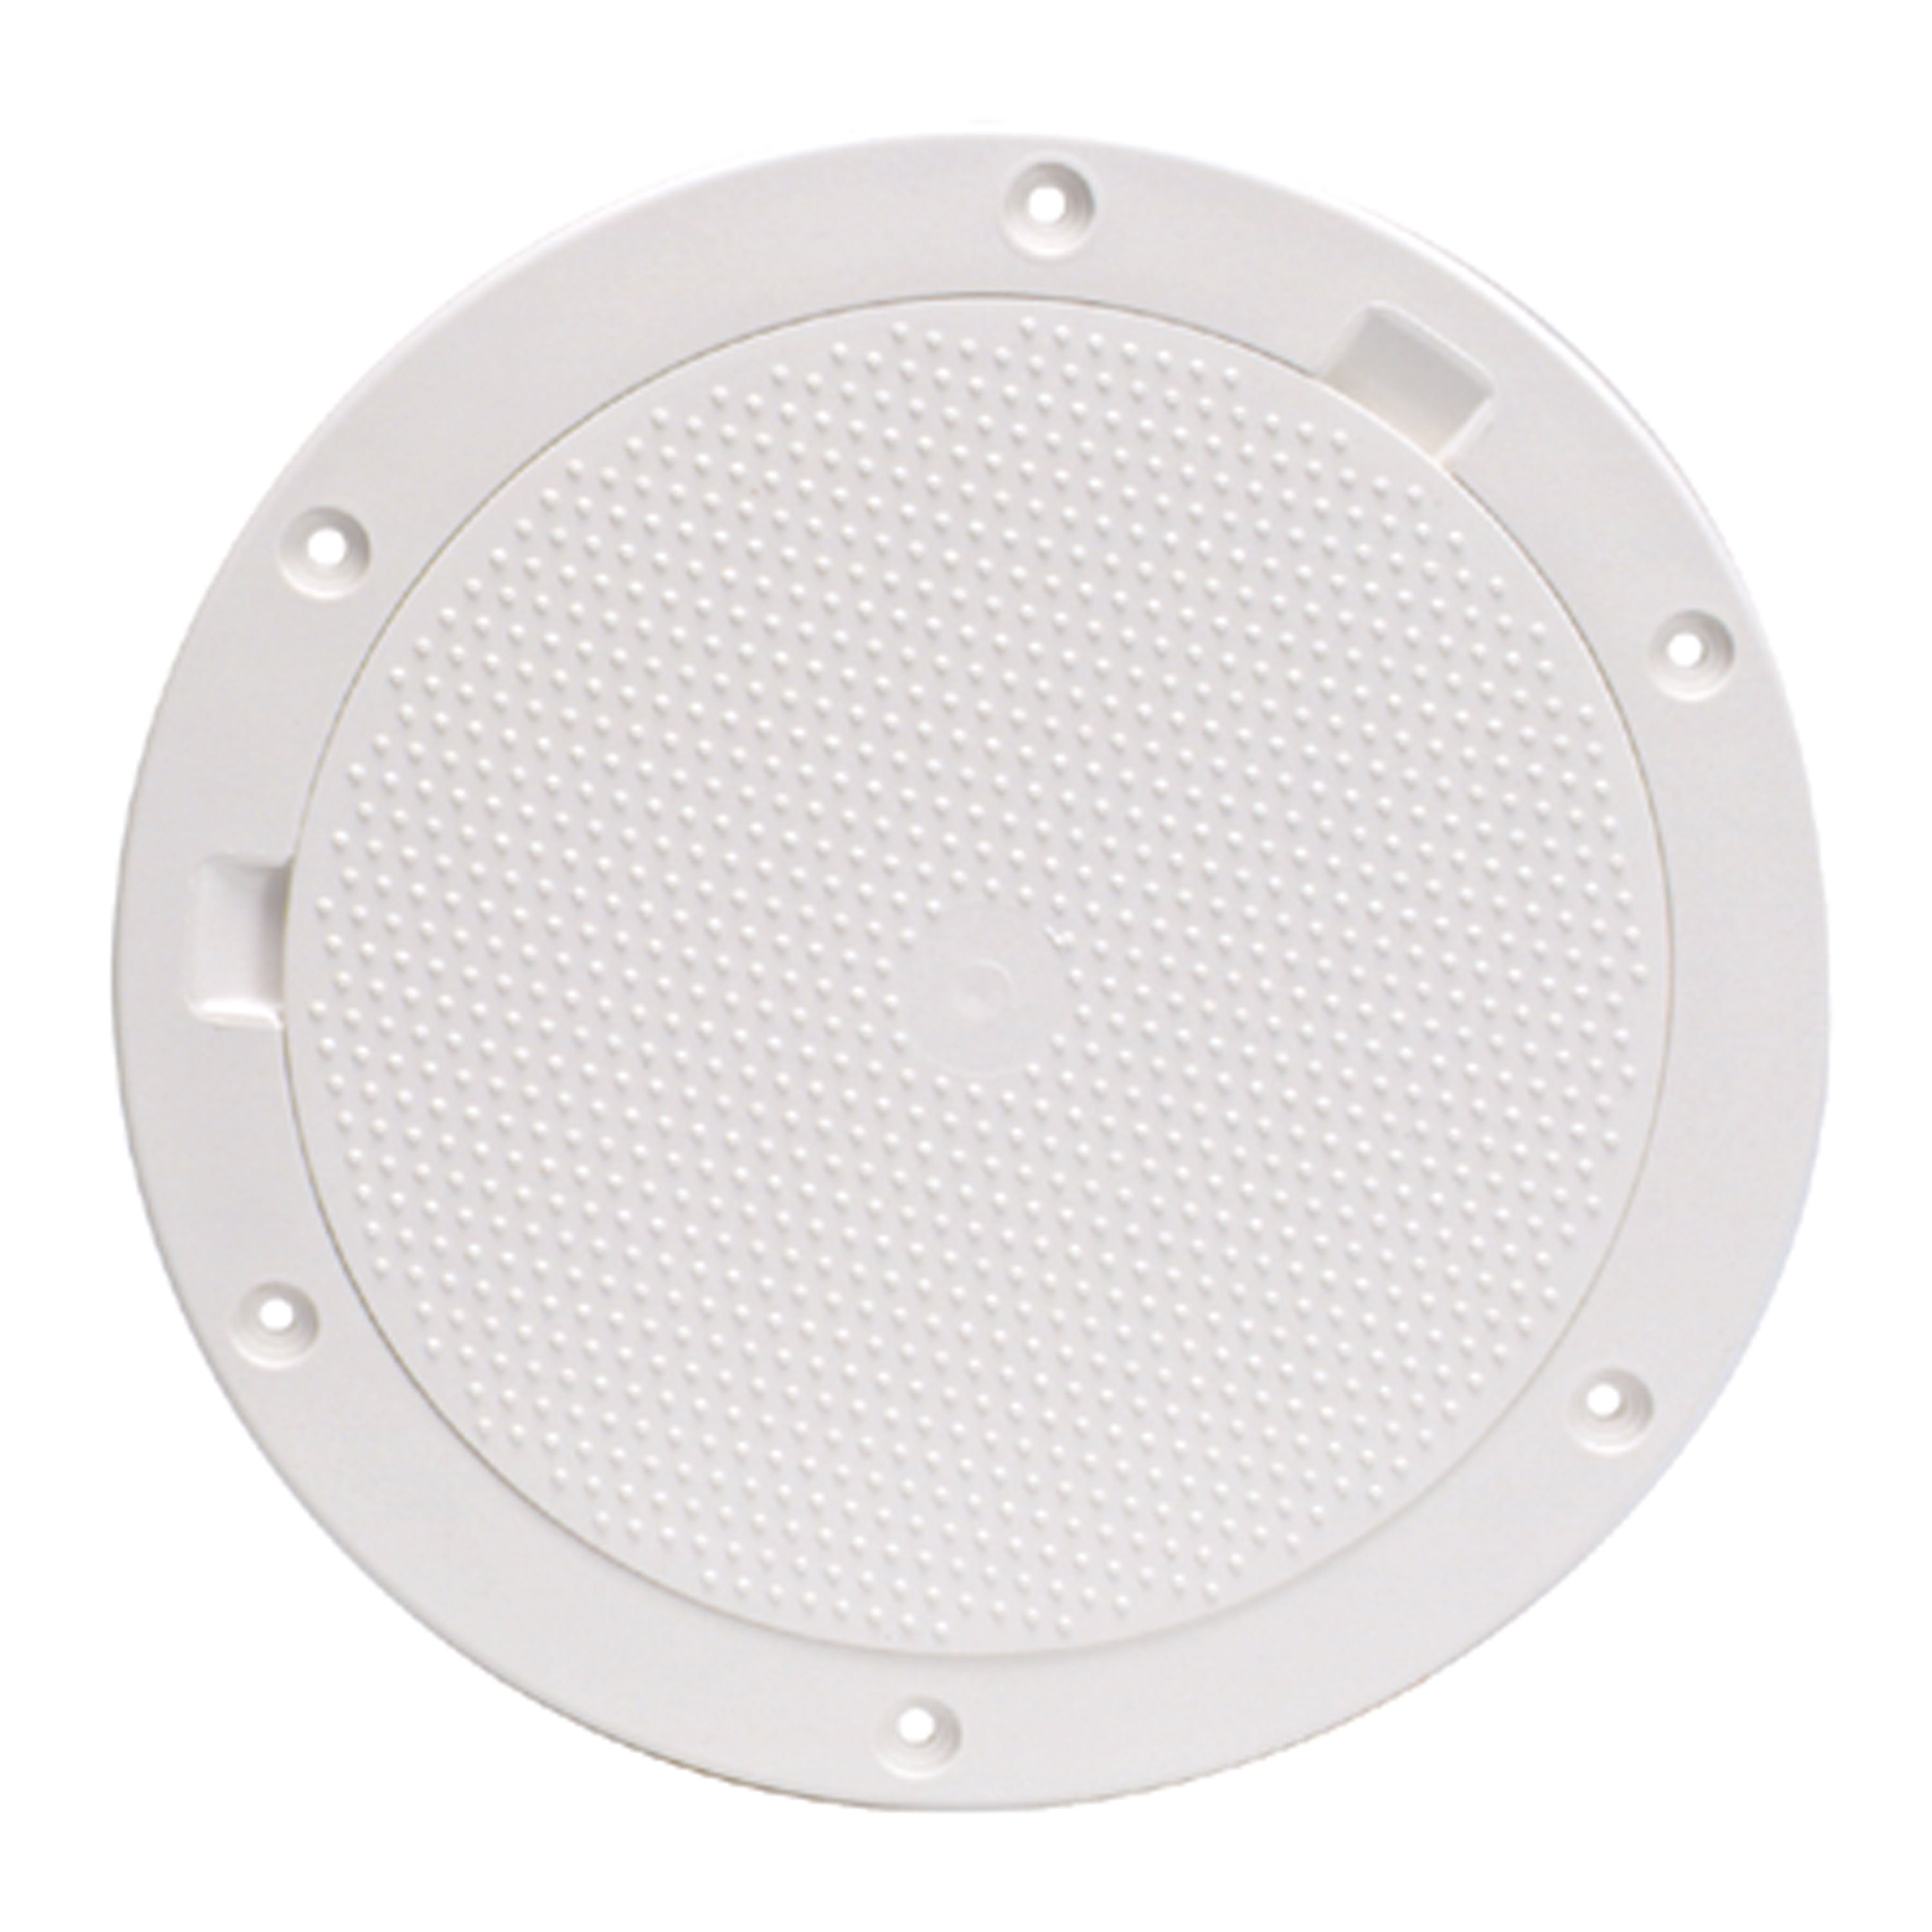 Beckson DP63-W Pry-Out Deck Plate - 6" with Pebble Center, White